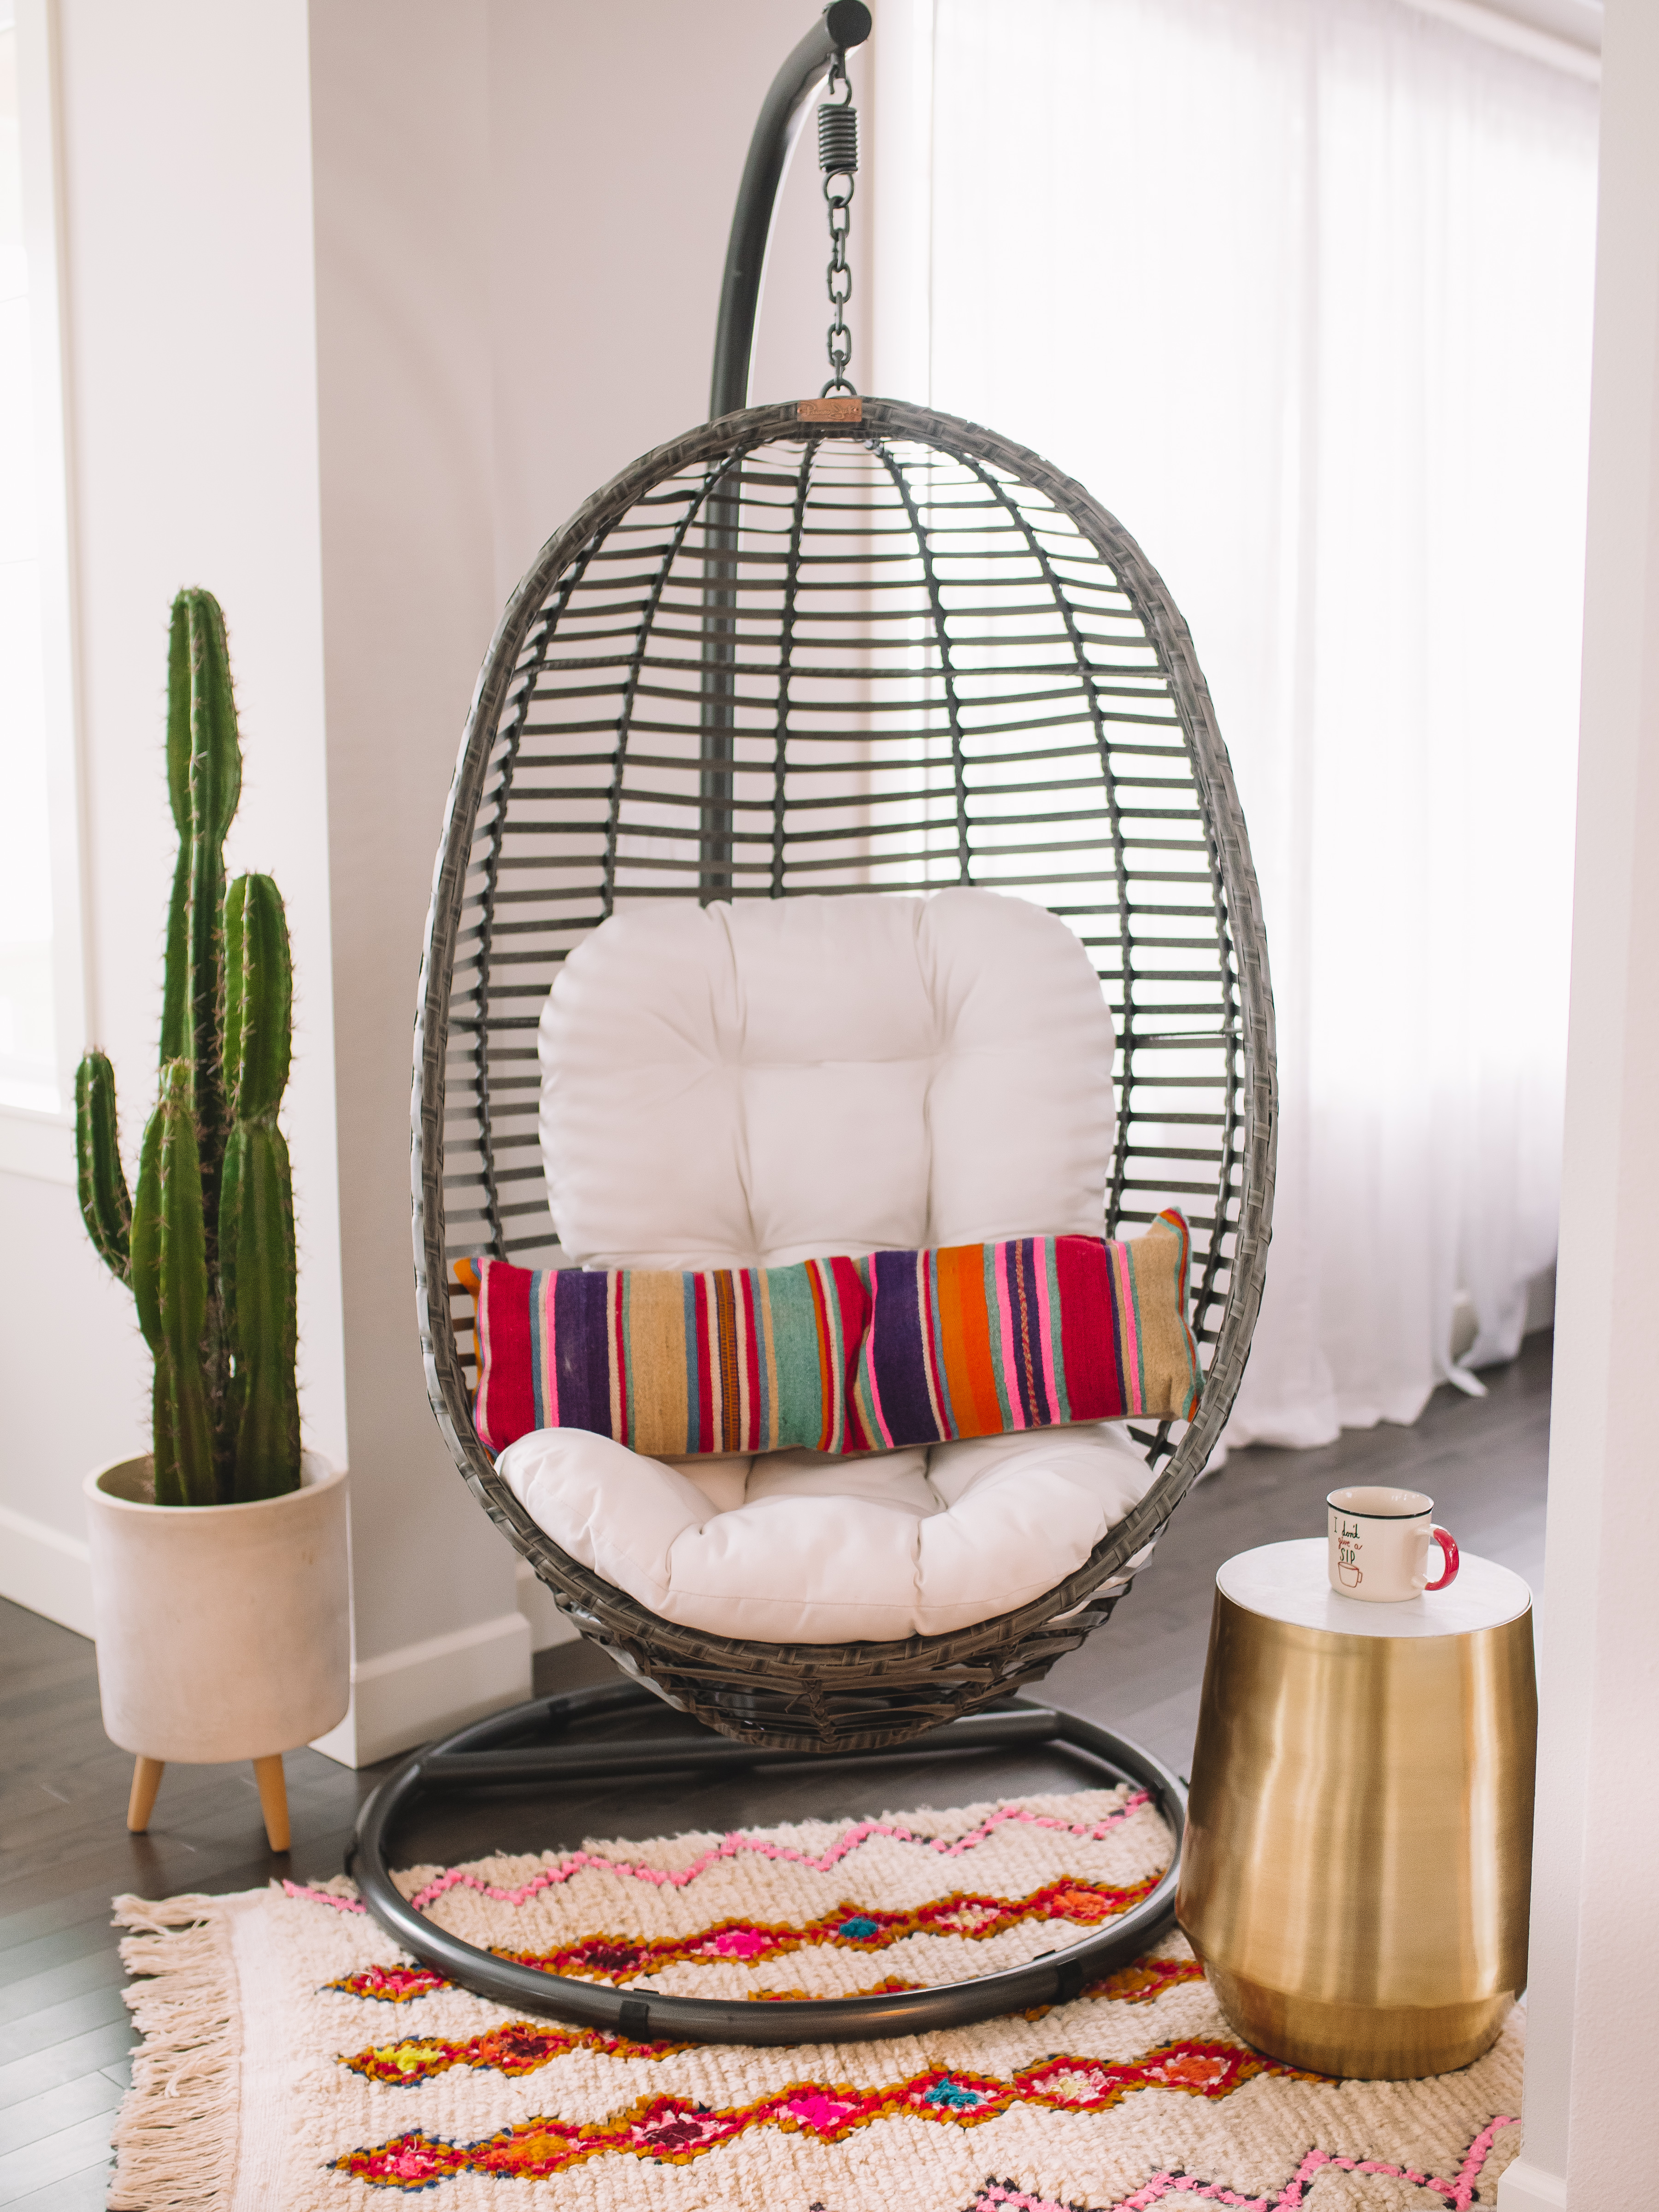 Swing Chair with Stand Home Decor Ideas GypsyTan Home